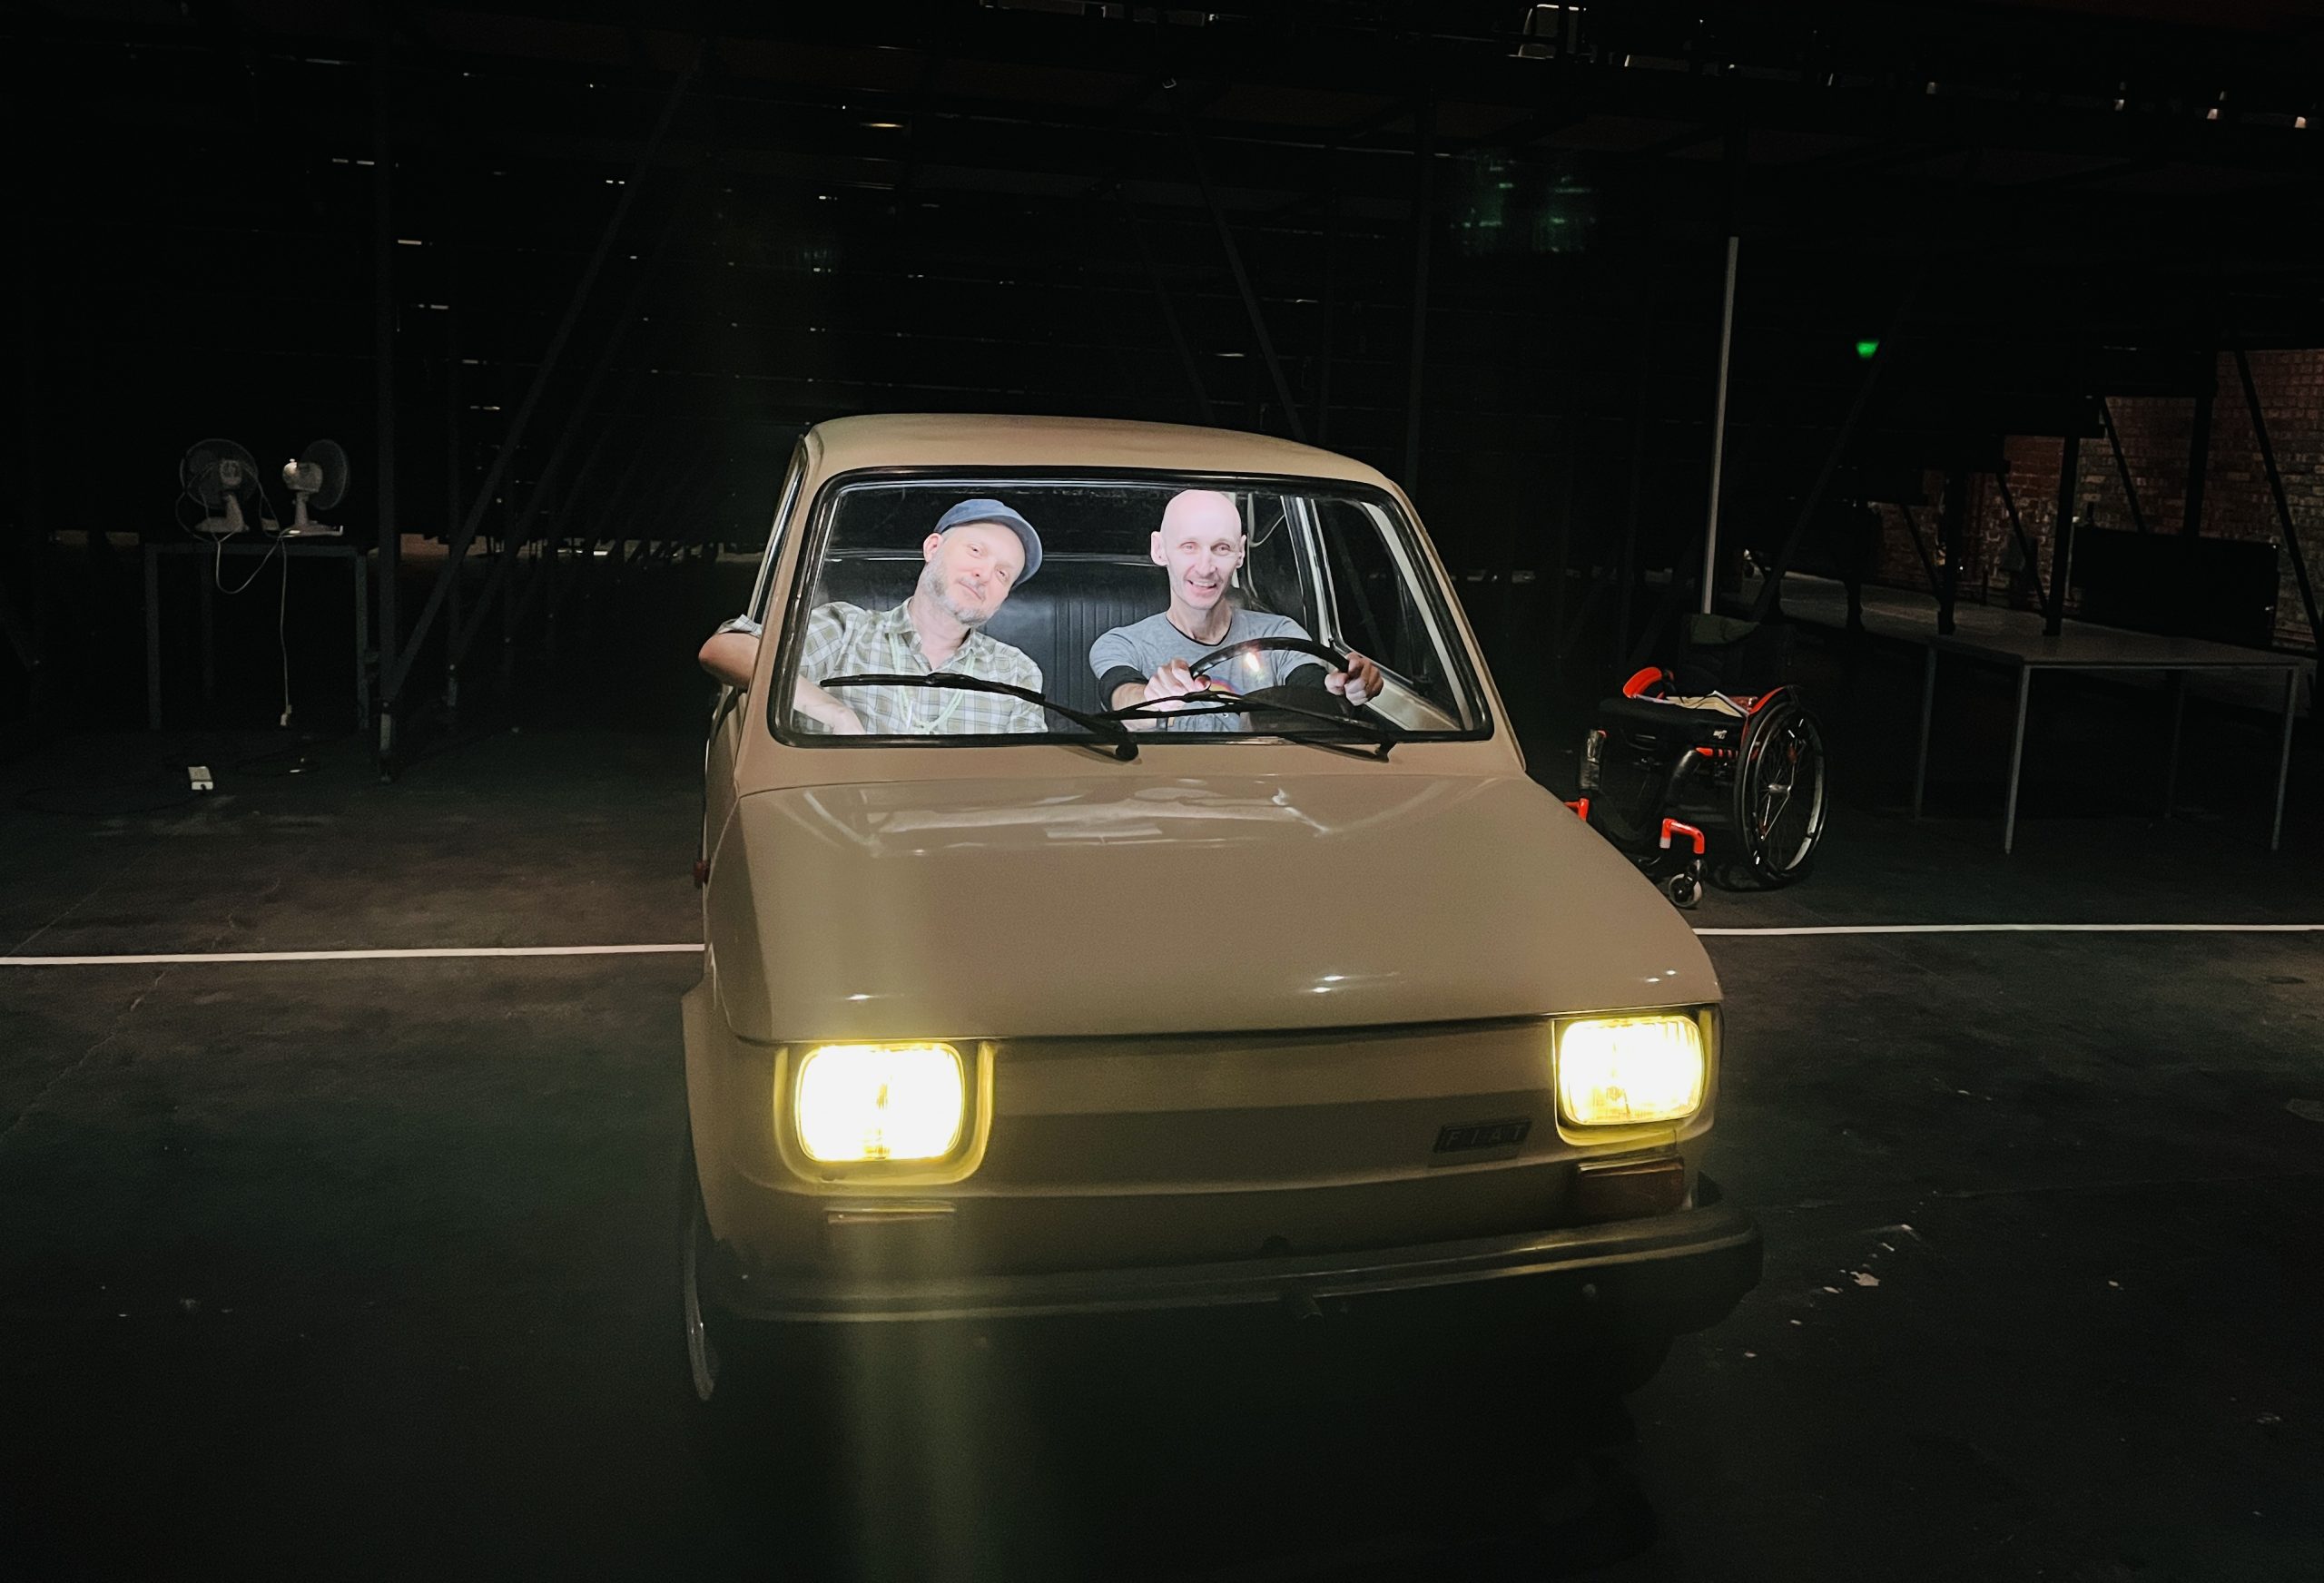 Sidi Larbi Cherkaoui sits in the passenger seat of a small white care. Marc is in the drivers seat. They're smiling. The cars headlights are lit. They're on a stage with a black dance floor. We can see Marc's wheelchair in the background behind them.  